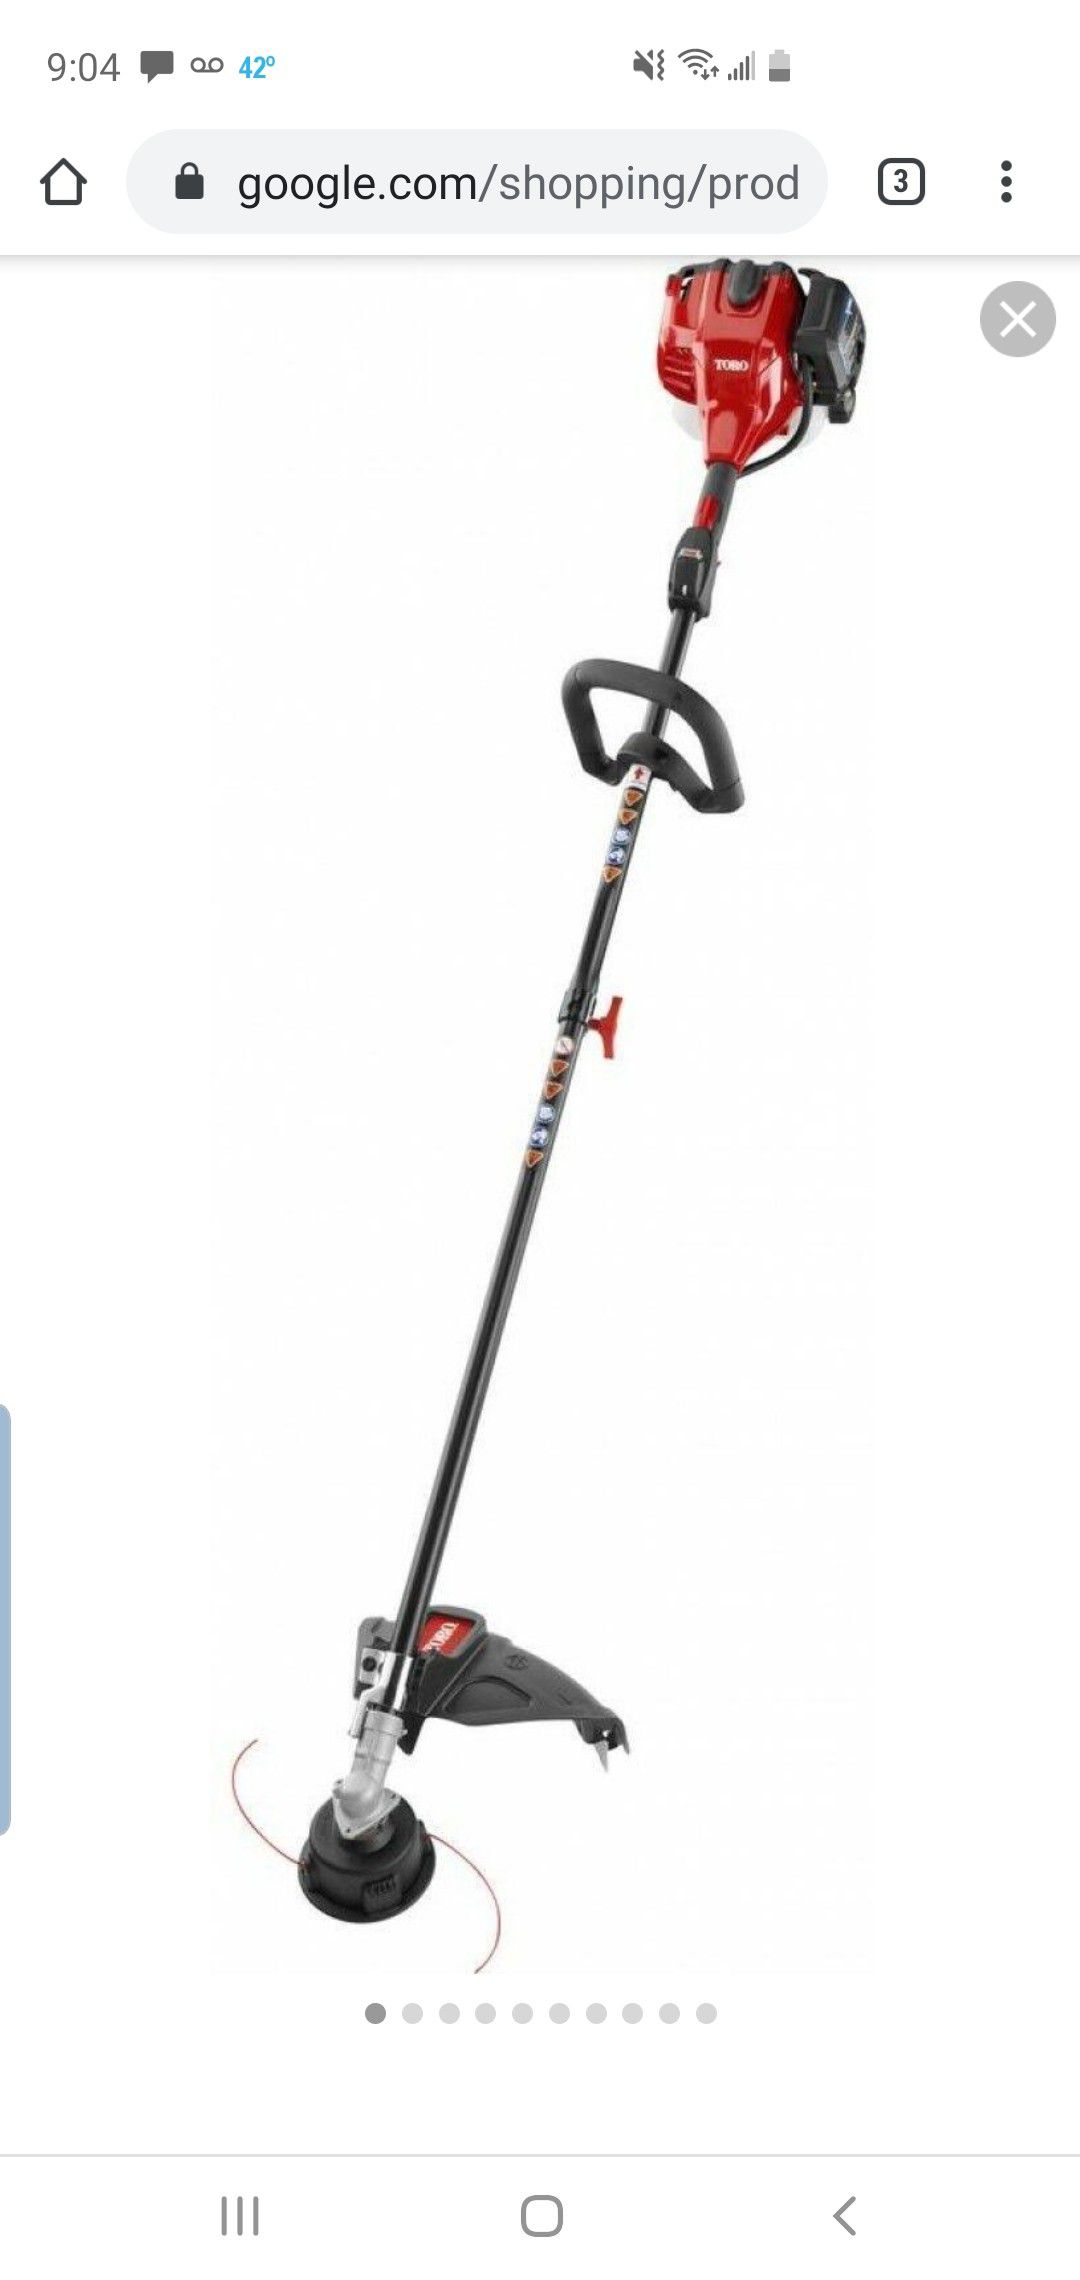 Toro 2-Cycle 25.4cc Attachment Capable Straight Shaft Gas String Trimmer